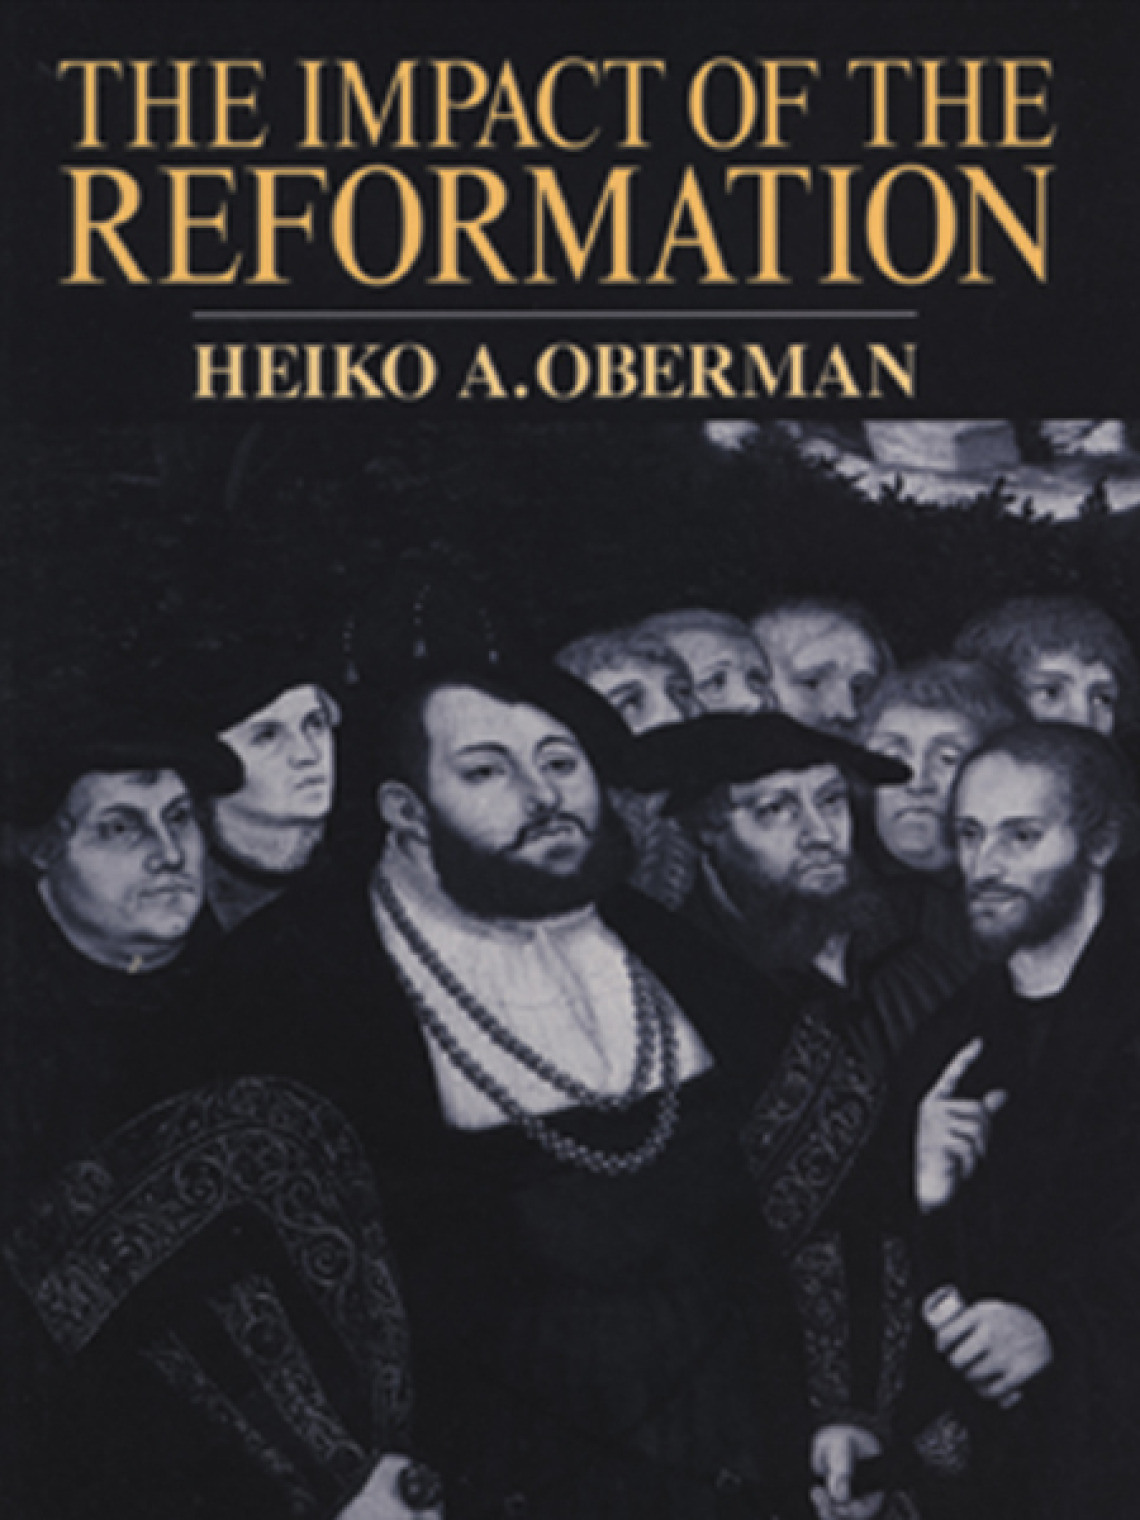 Cover of The Impact of the Reformation by Heiko A. Oberman